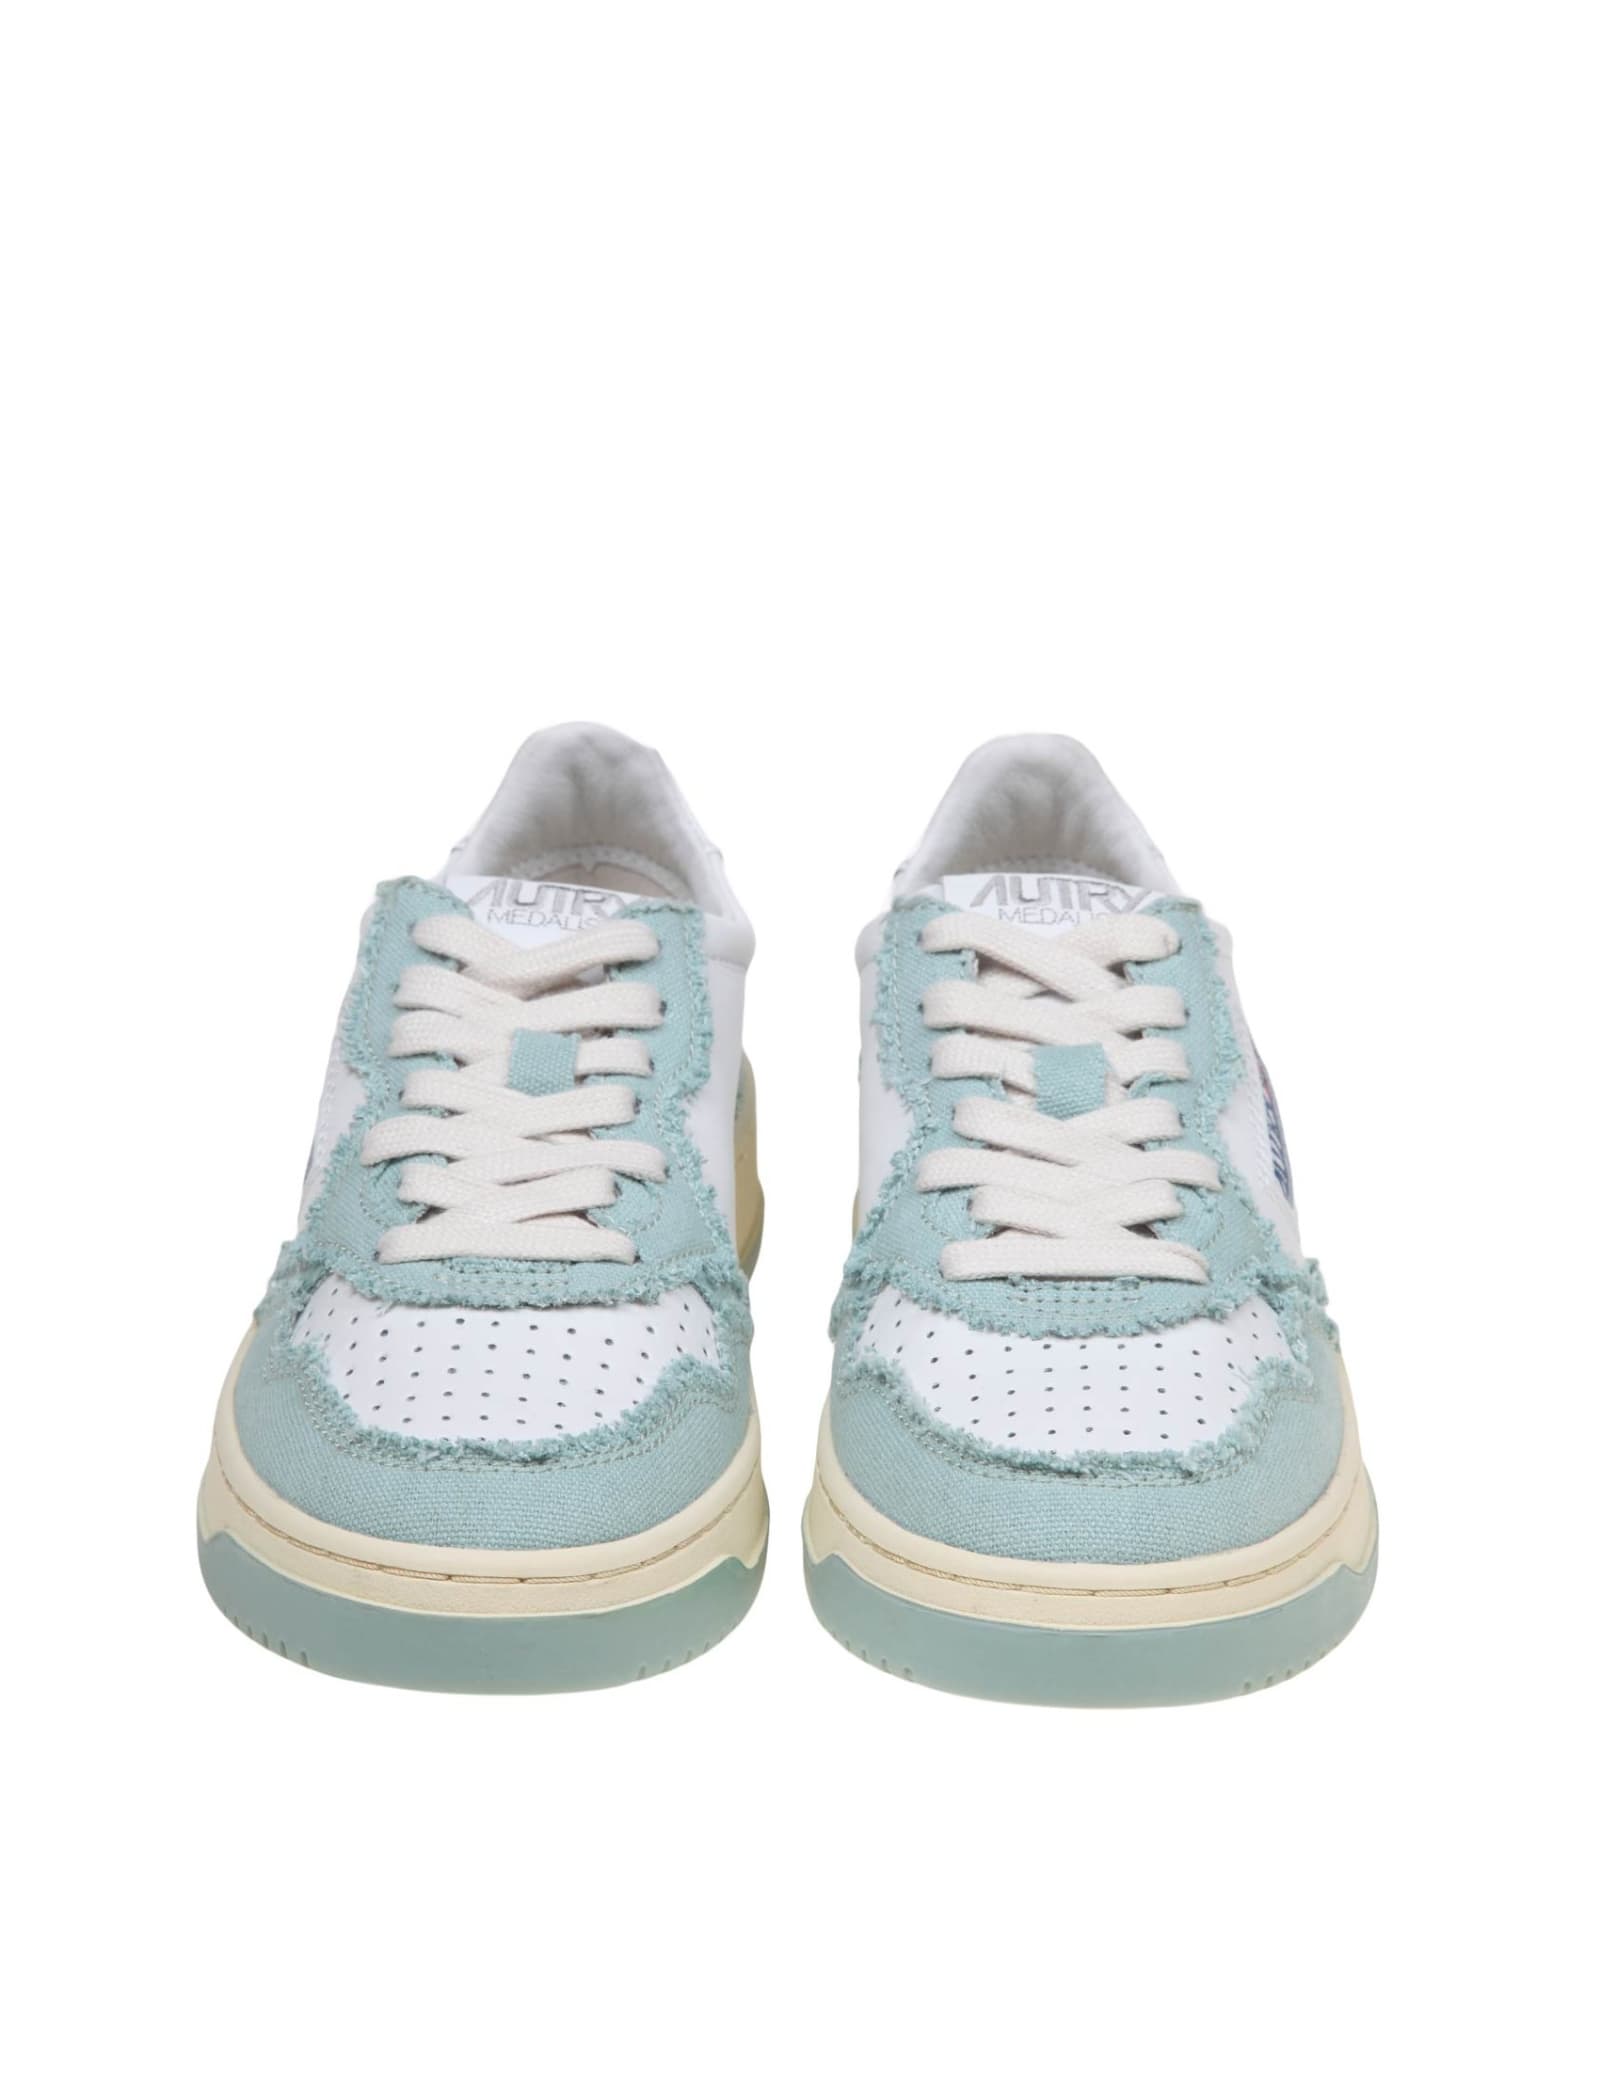 Shop Autry Sneakers In White And Light Blue Leather And Canvas In White/blu